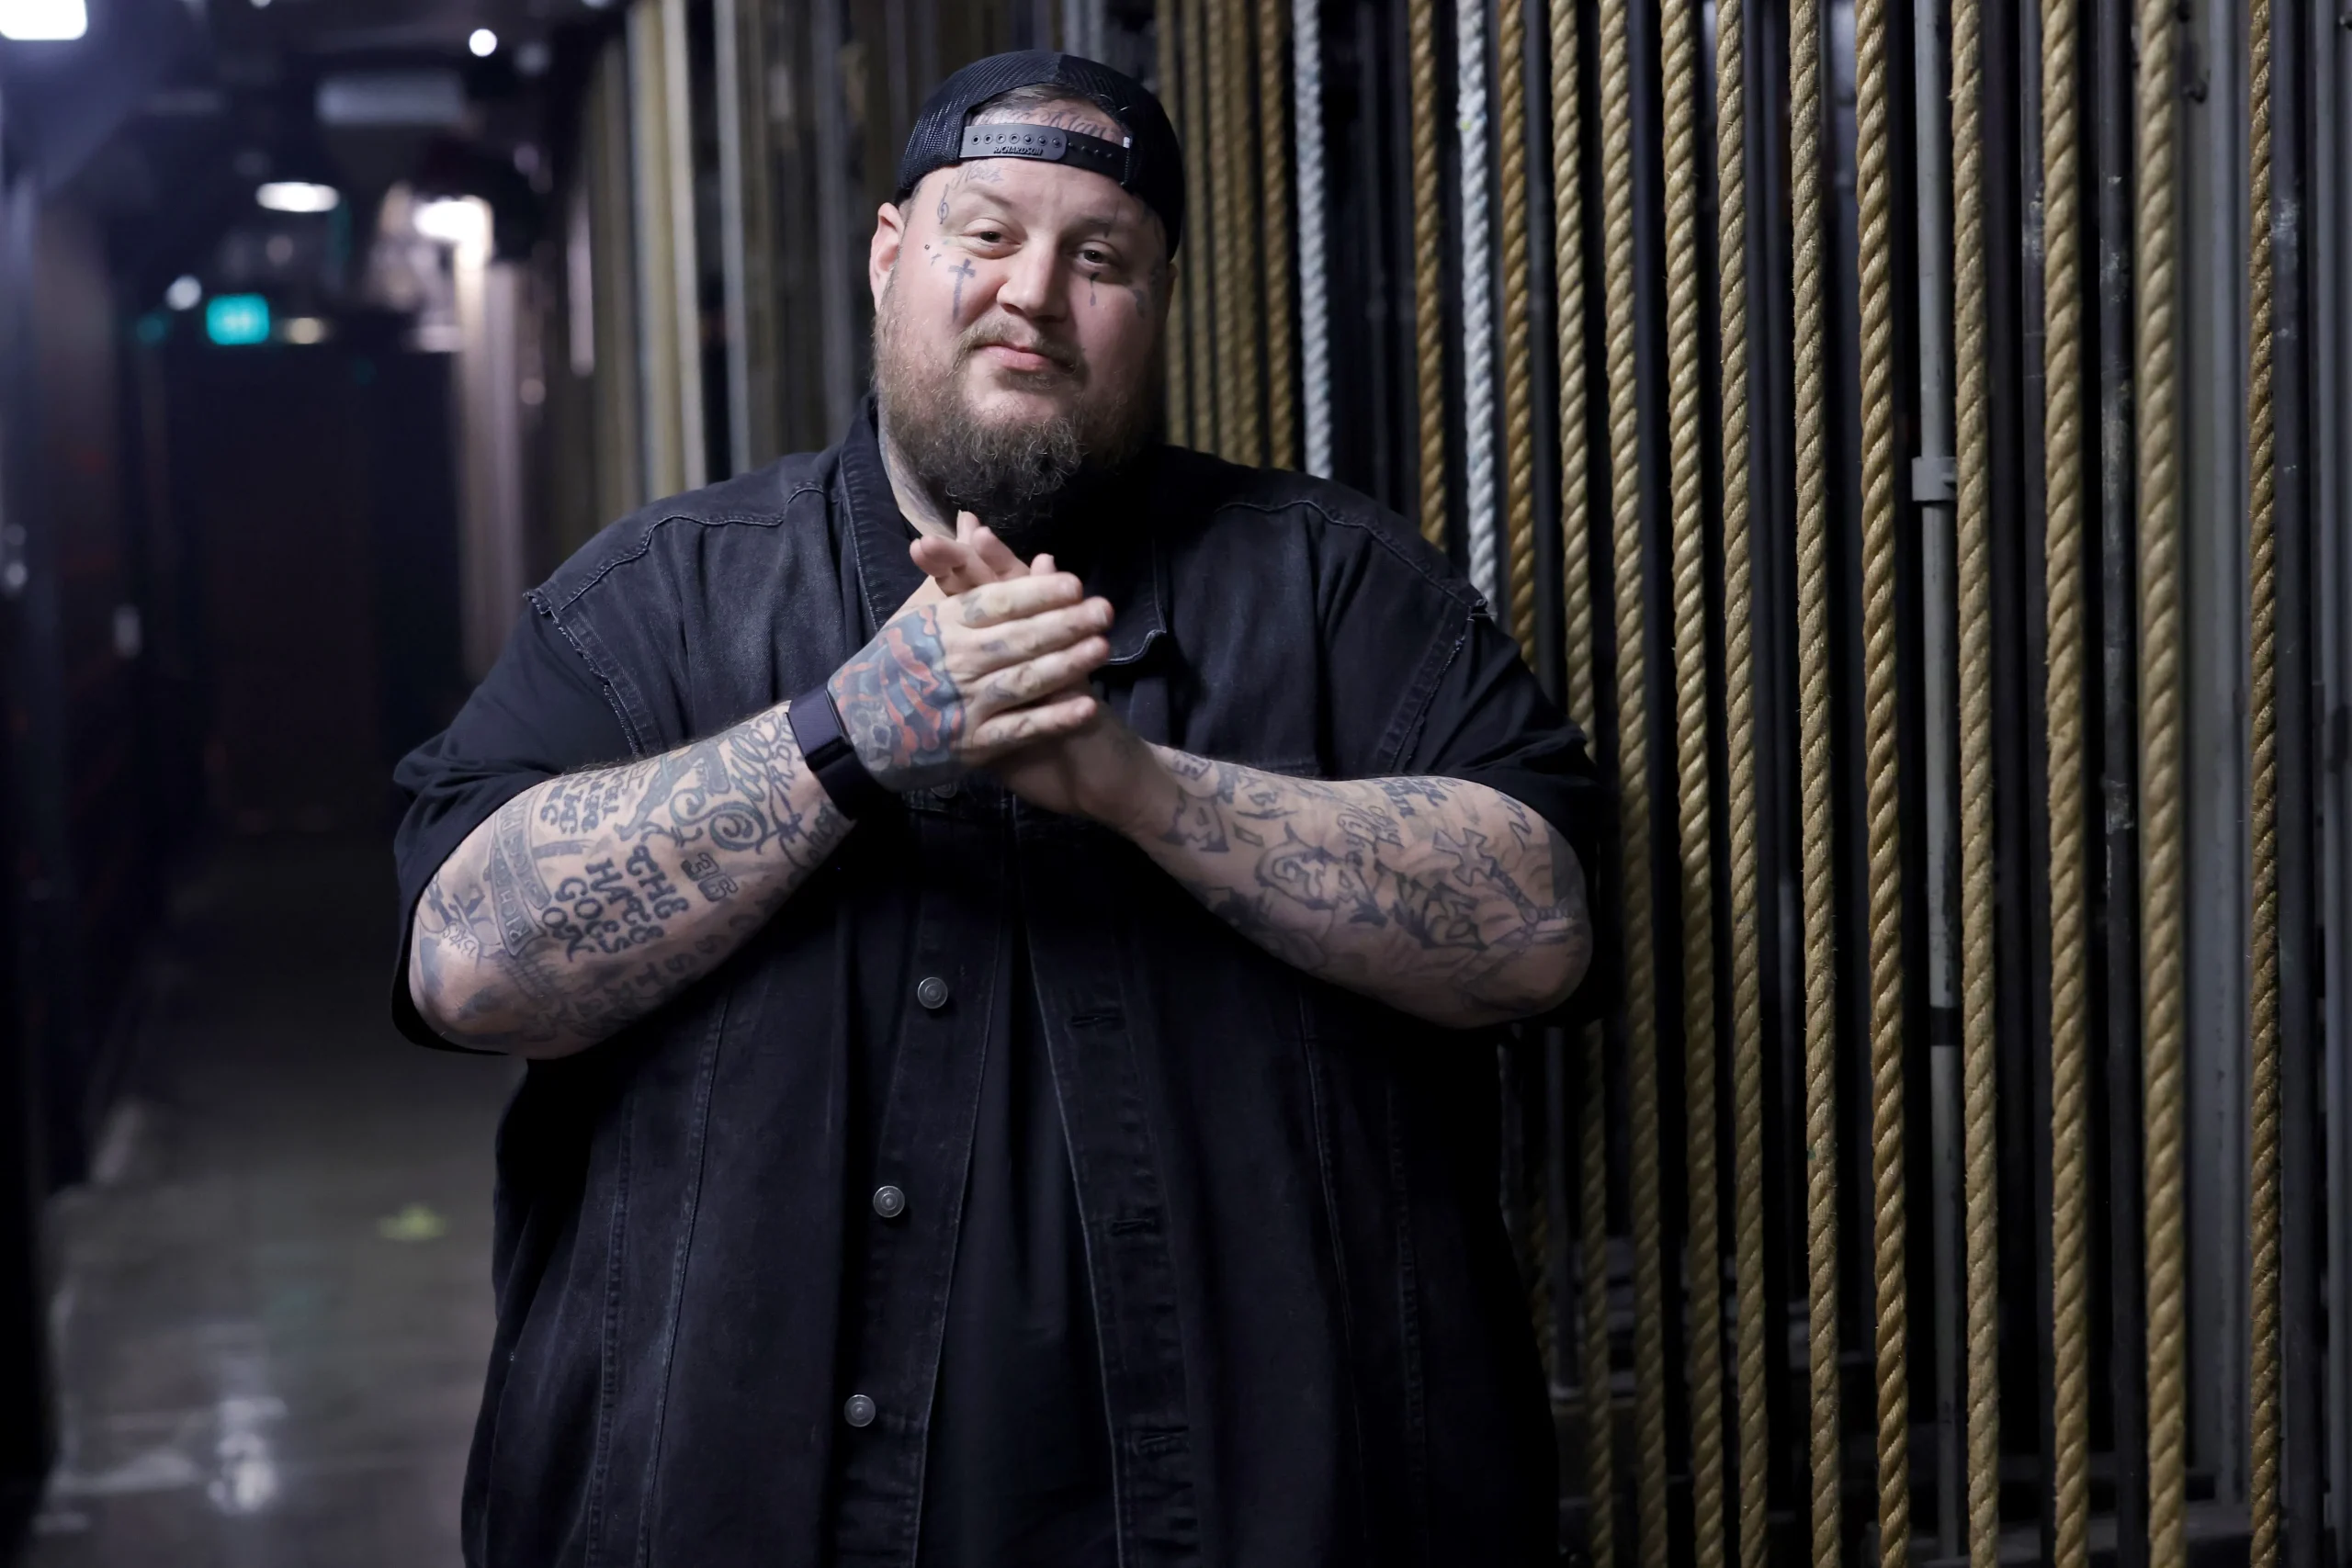 Who Is Jelly Roll? Age, Bio, Career And More Of The American Rapper